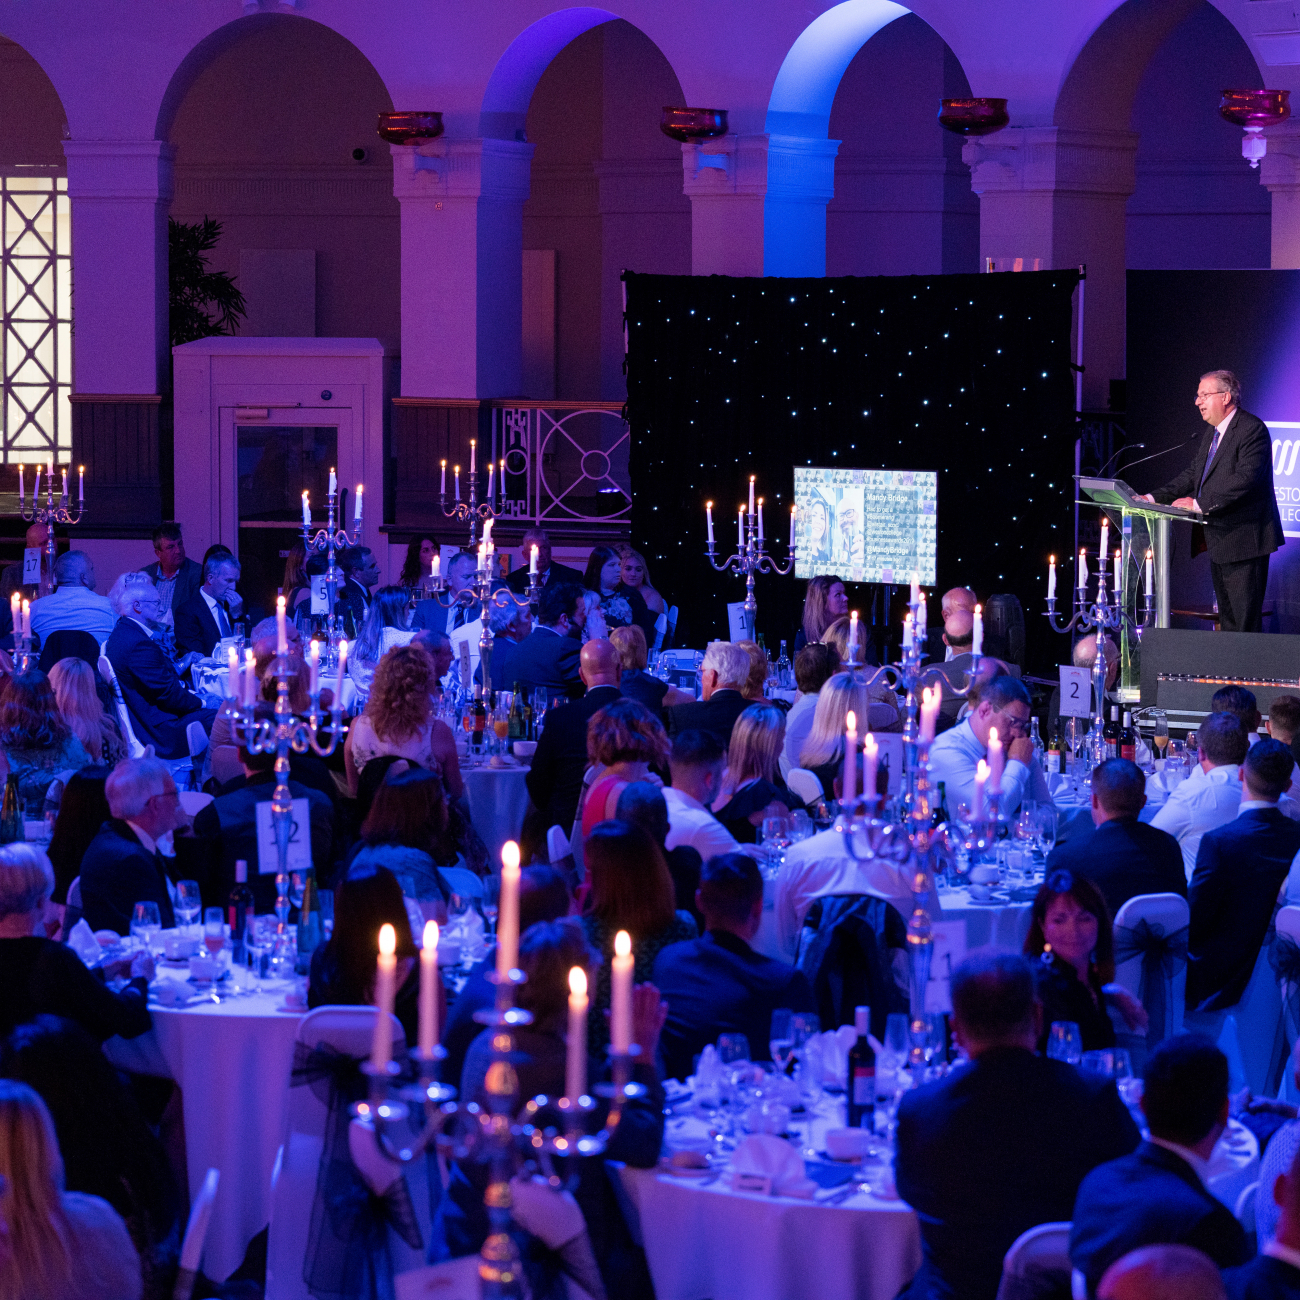 The Business Awards